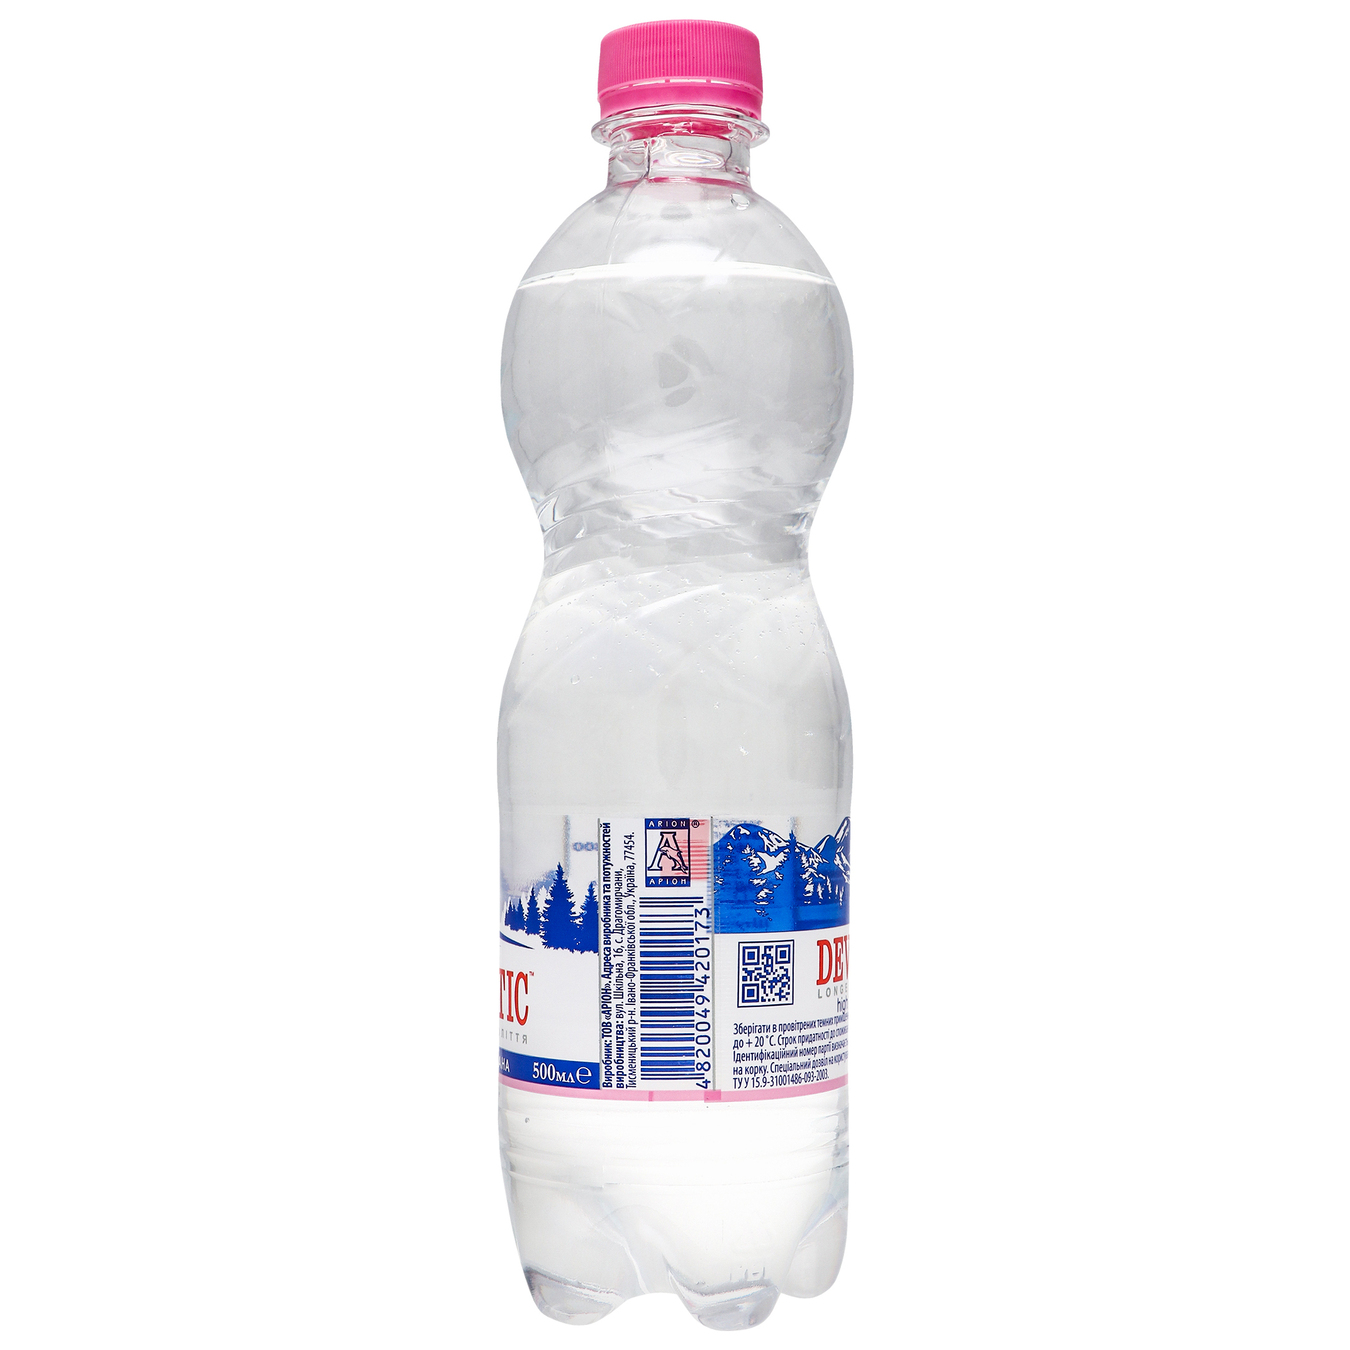 Devaitis strongly carbonated water 0.5l 2